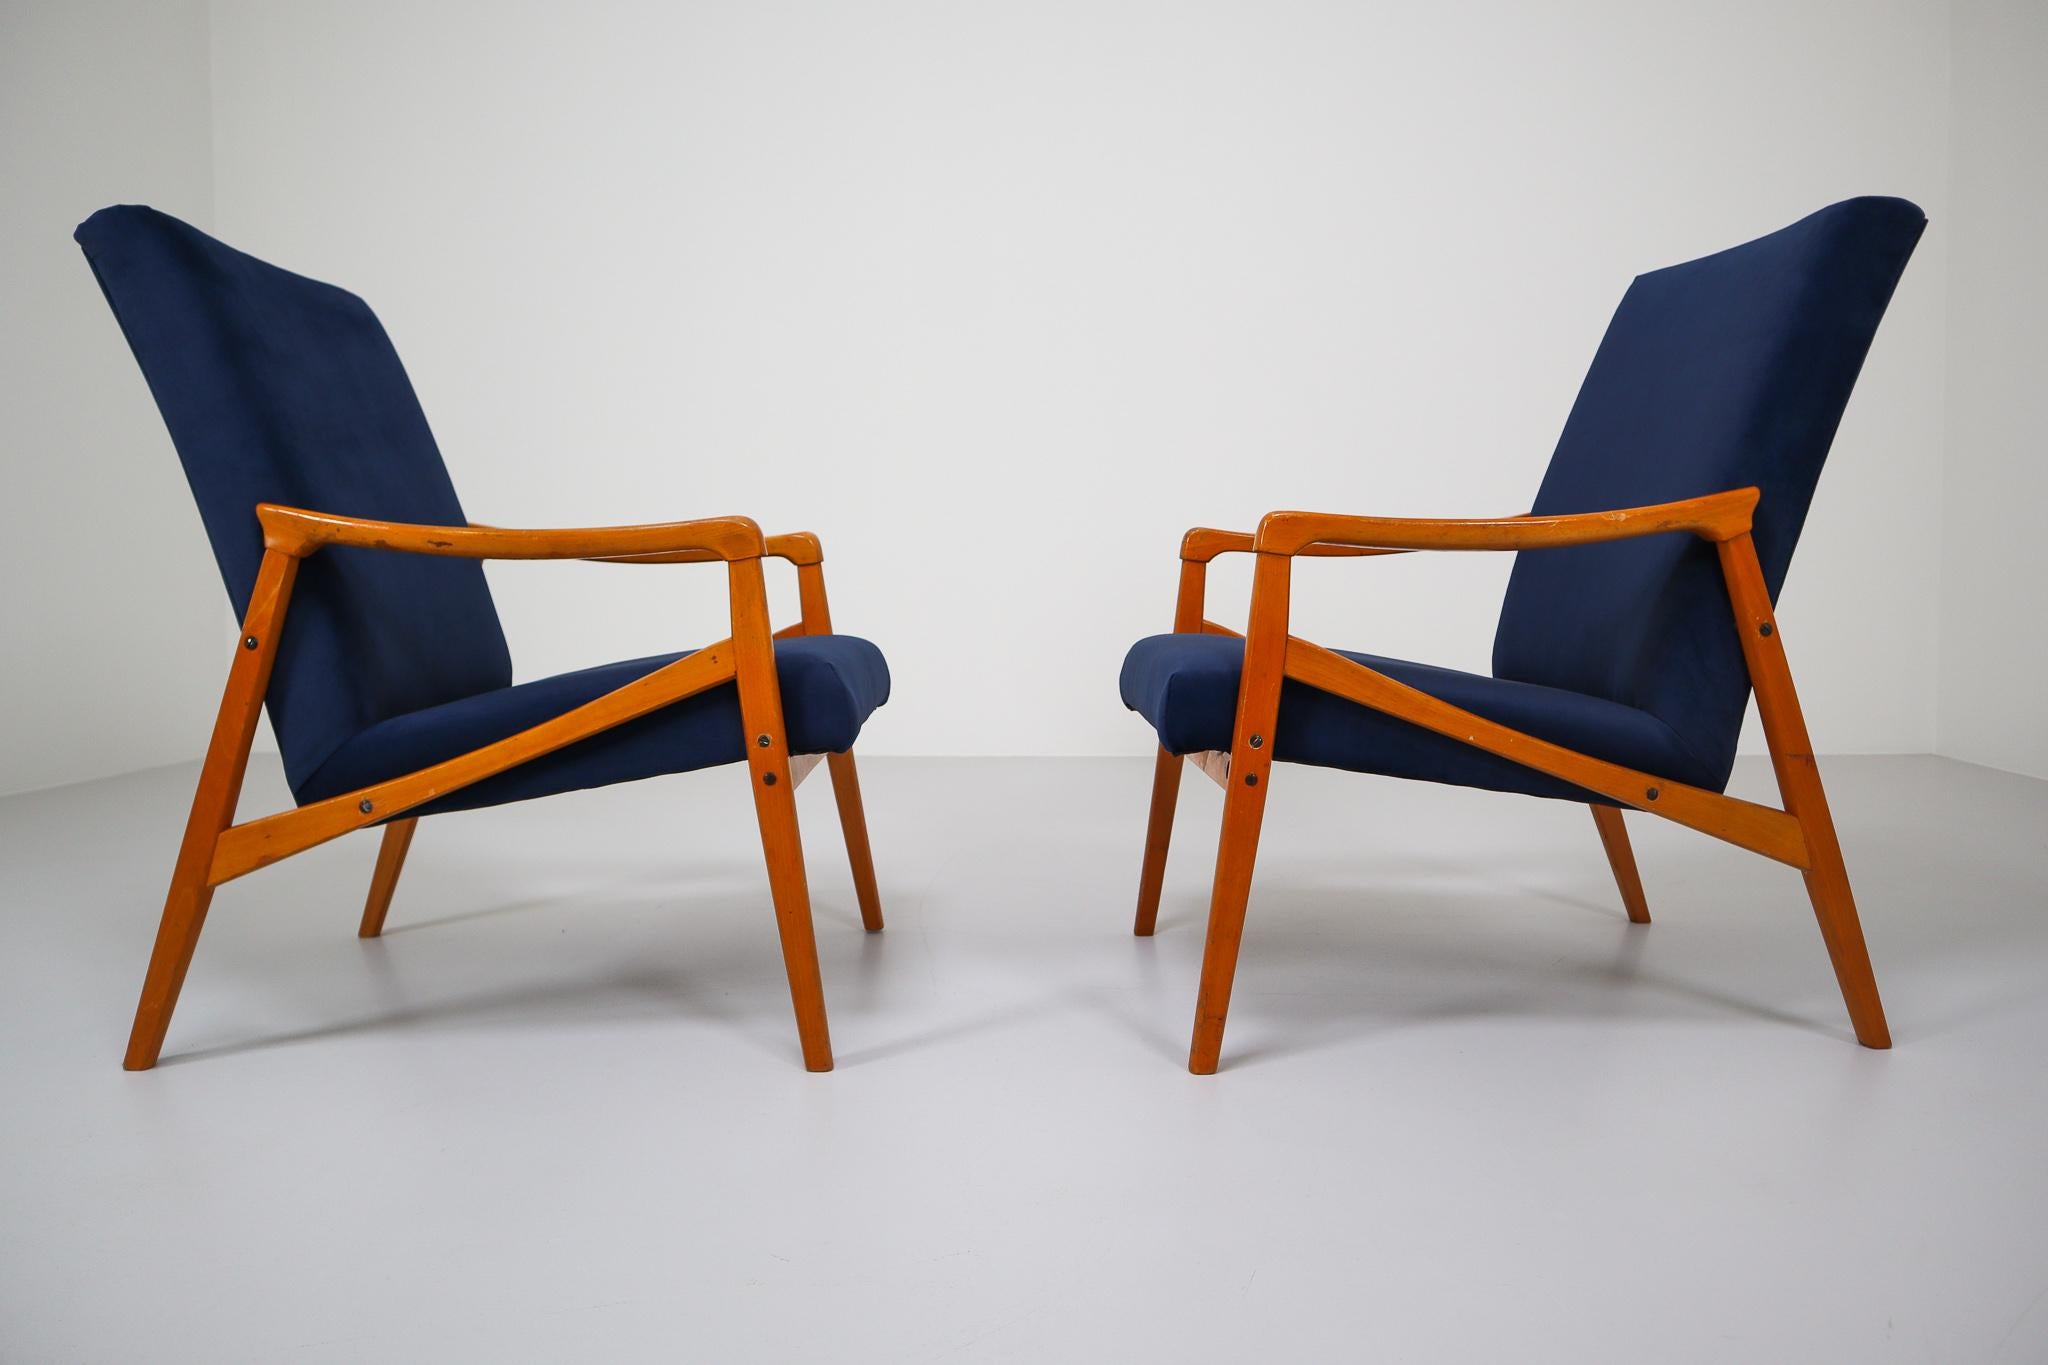 20th Century Midcentury Reupholstered Lounge Chairs in Blue Velvet, Czech Republic, 1970s